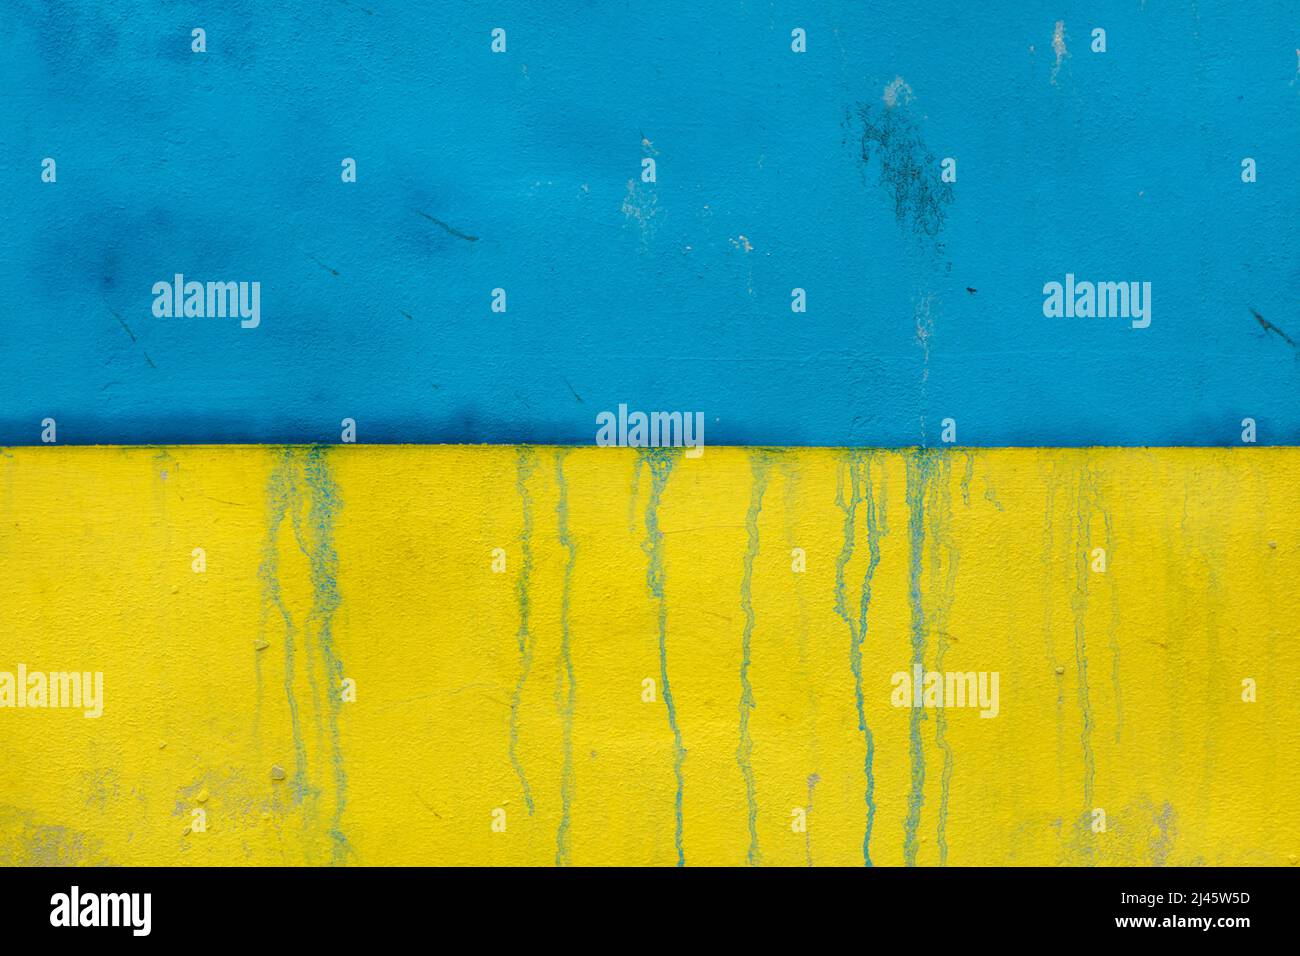 Ukrainian national flag depicted on the wall in Prague, Czech Republic. The huge flag was depicted to support Ukrainian refugees in the Czech Republic and to protest against the Russian invasion of Ukraine in 2022. Stock Photo